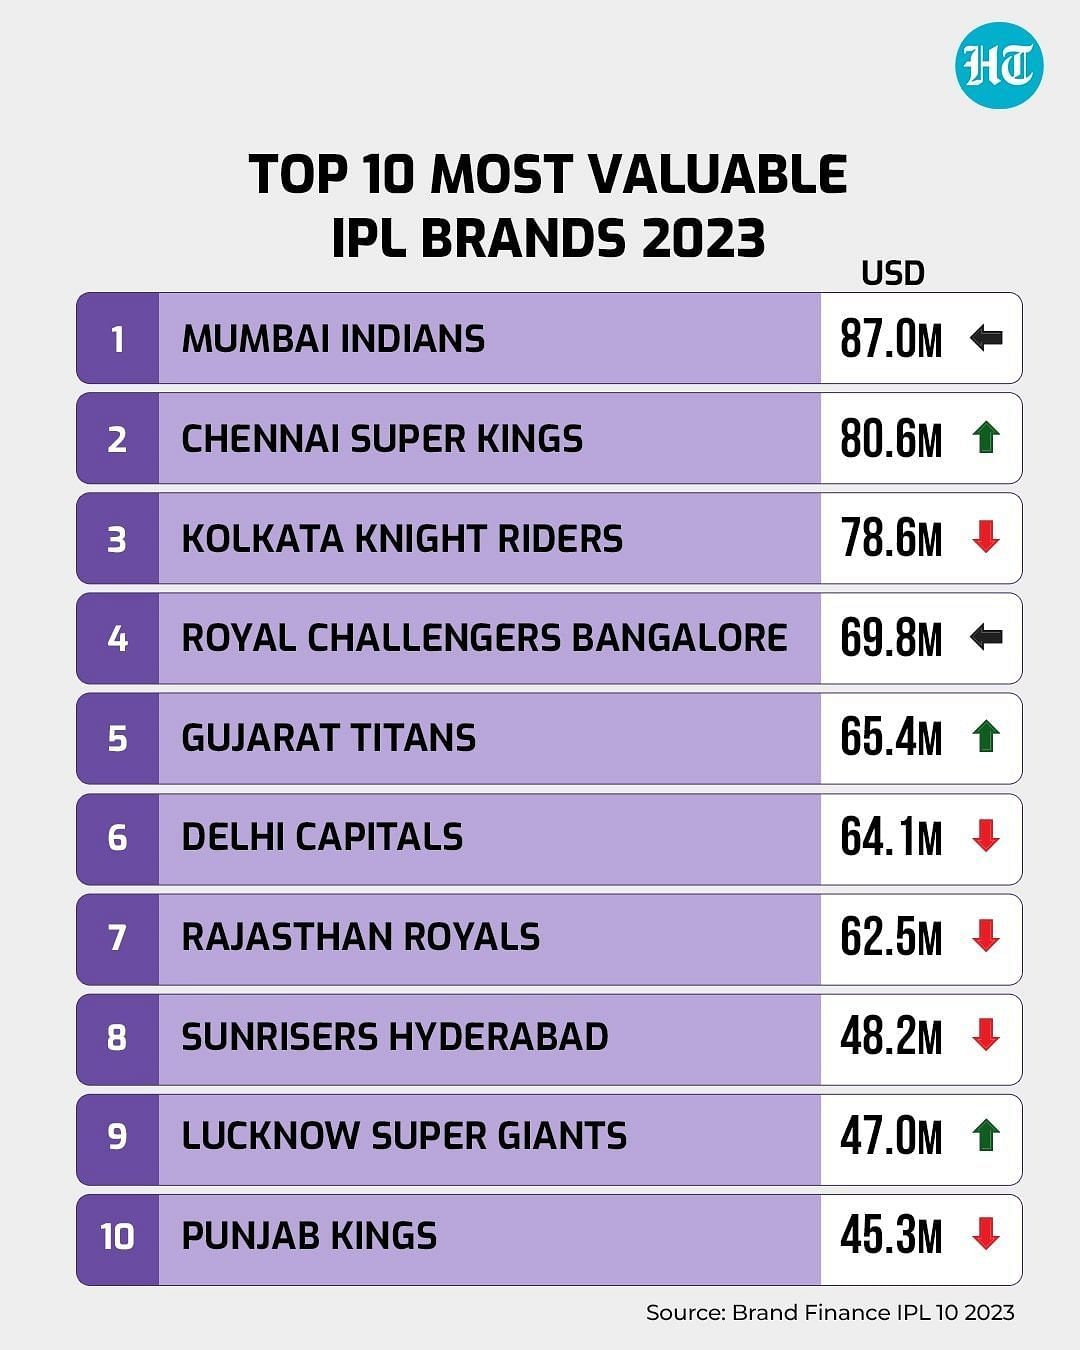 IPL brand value jumps to $10.7 billion; &lt;span class=&#039;entity-link&#039; id=&#039;suggestBtn-35&#039;&gt;Mumbai Indians&lt;/span&gt; most valuable:  Report - Hindustan Times